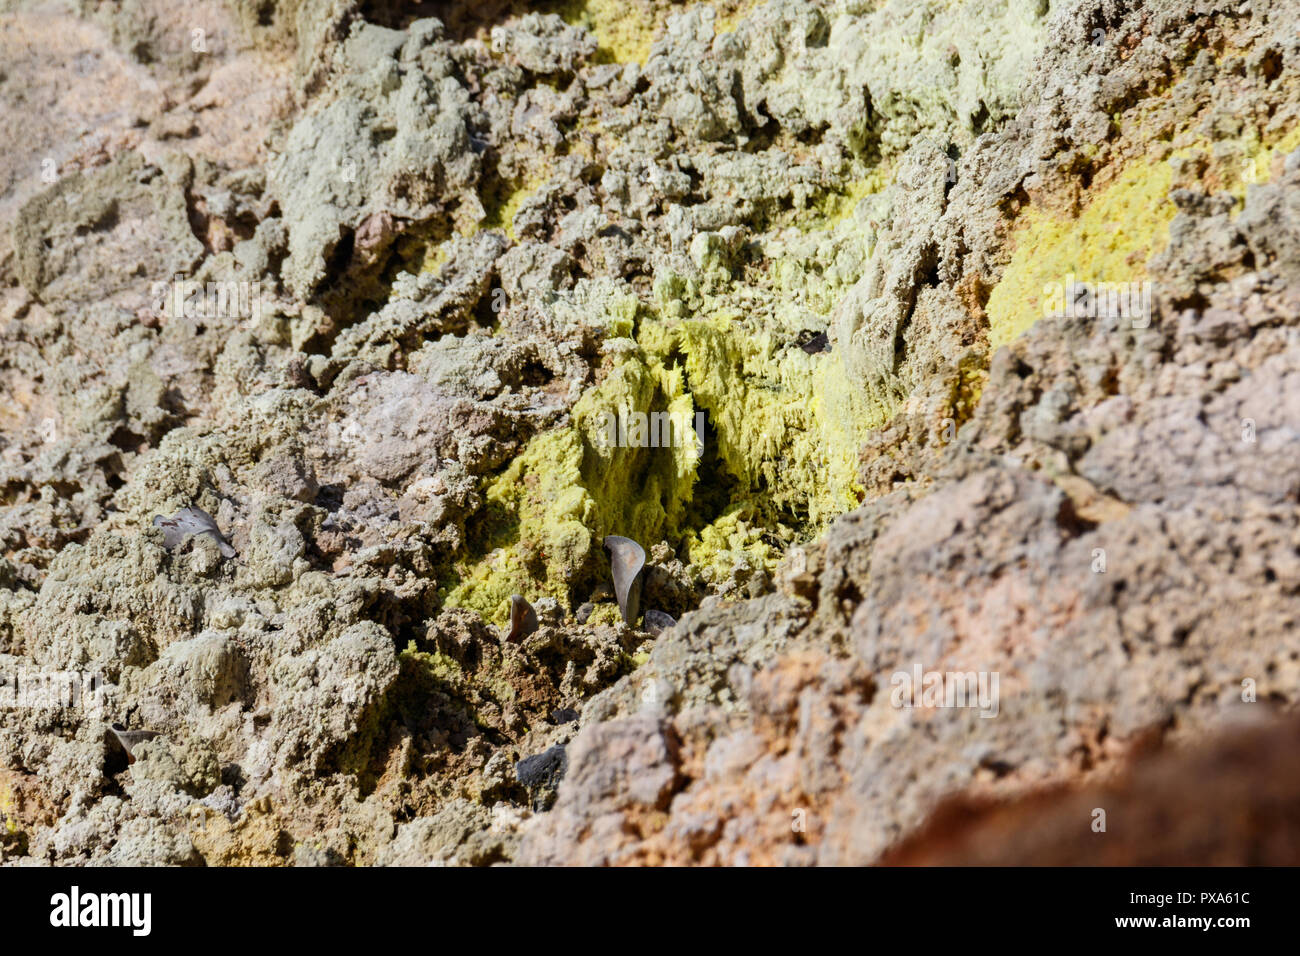 Sulfur mineral deposit, with visible crystals, at a volcanic gas vent. In Volcano National Park, Hawaii. Stock Photo